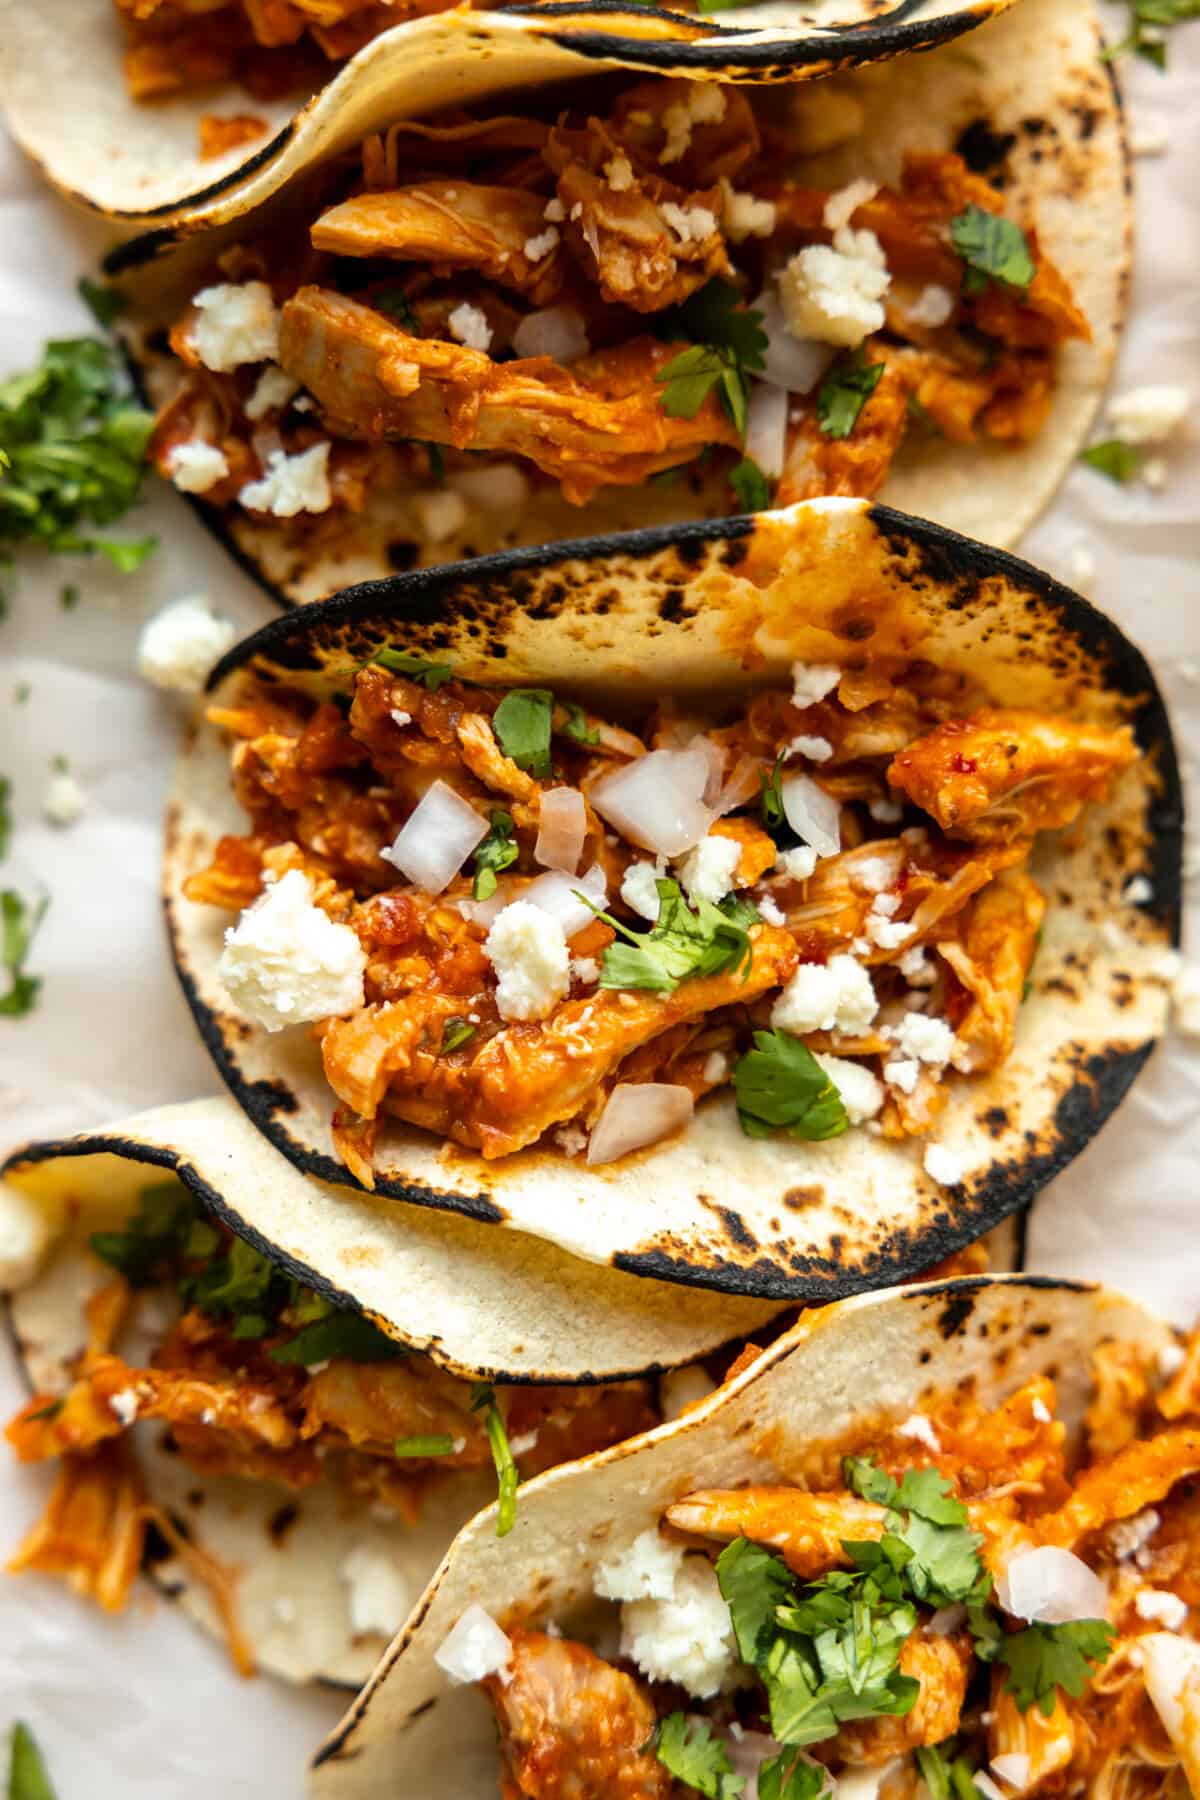 Corn tortillas with charred edges filled with chicken Tinga, topped with diced onion and cilantro. 